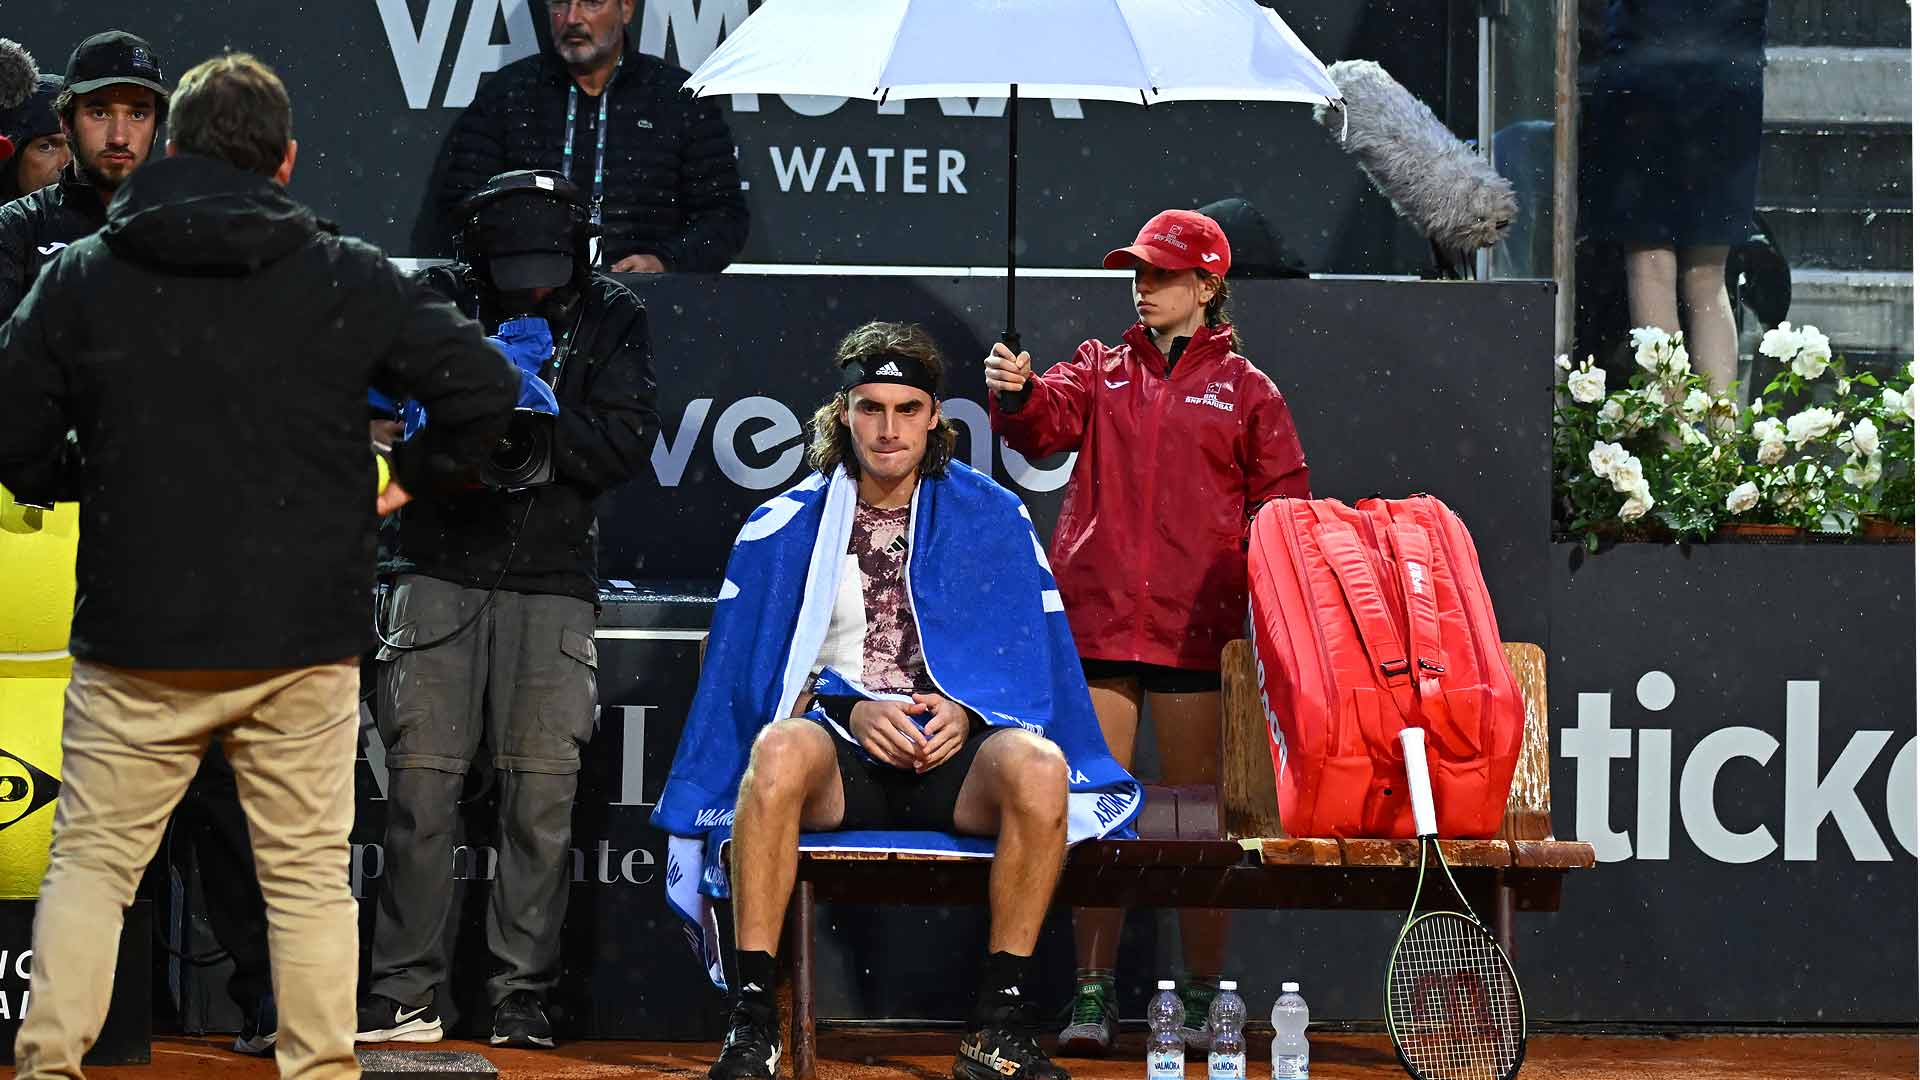 Stefanos Tsitsipas takes a one-set lead over Lorenzo Sonego on Monday in Rome, where rain suspends play.